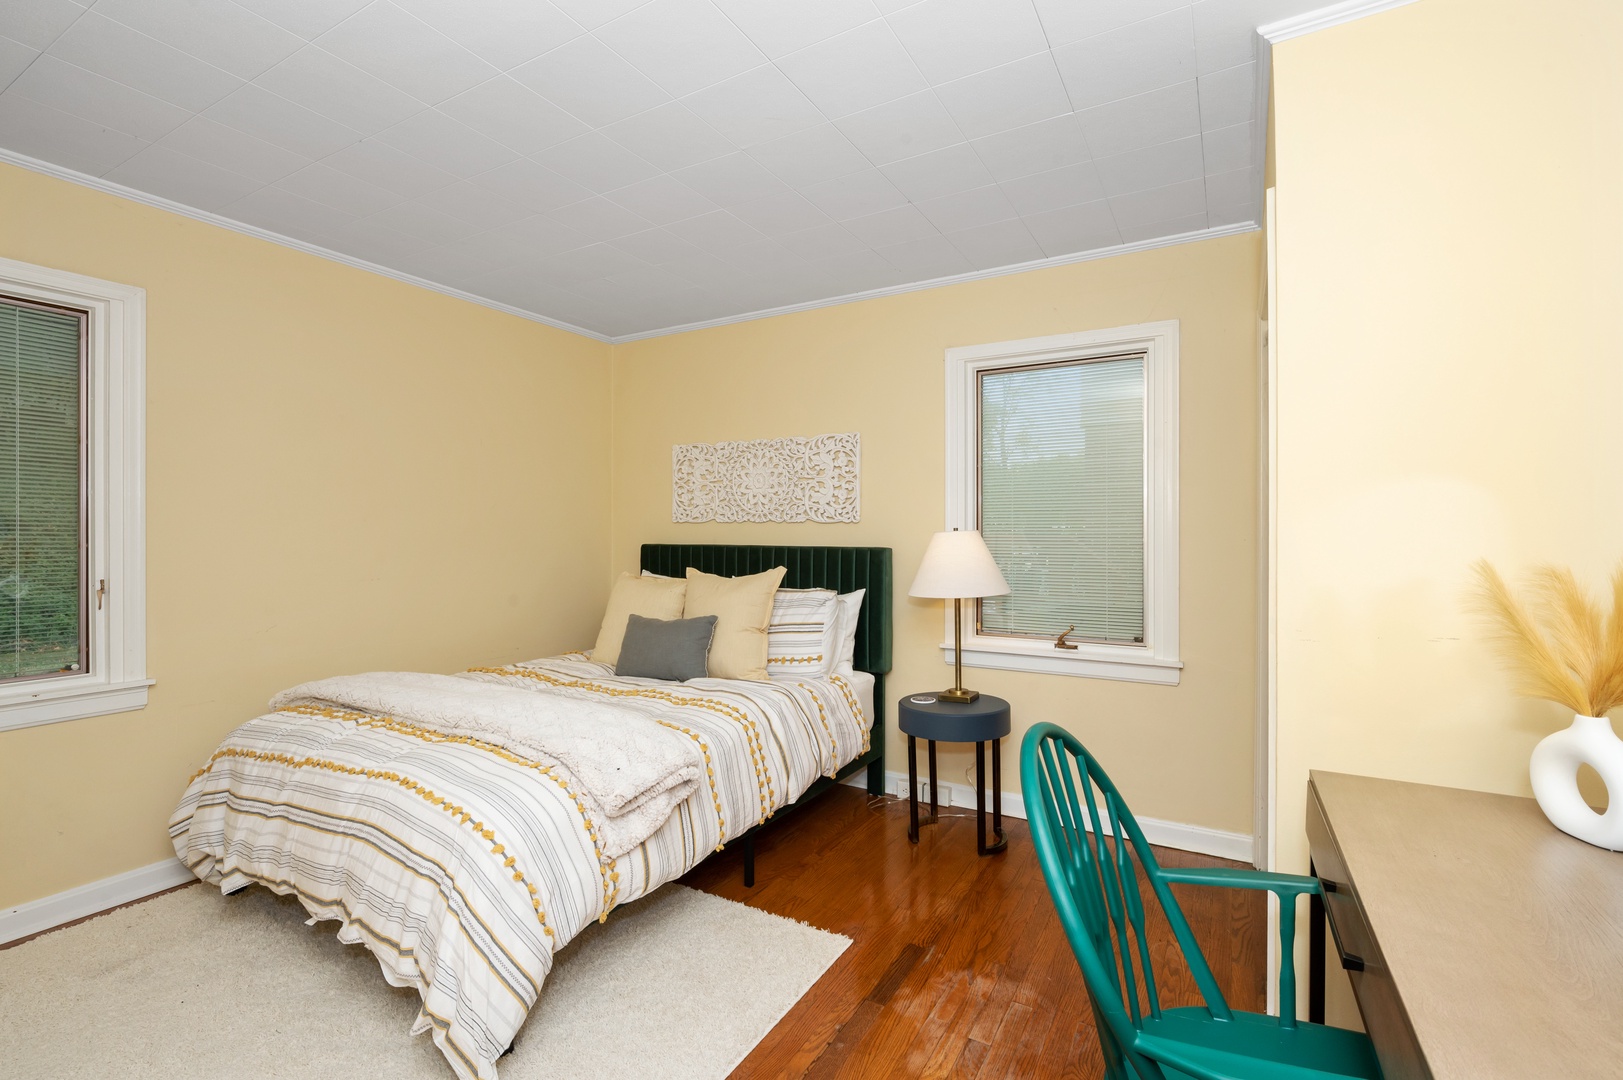 The spacious first-floor bedroom offers a queen bed & desk workspace